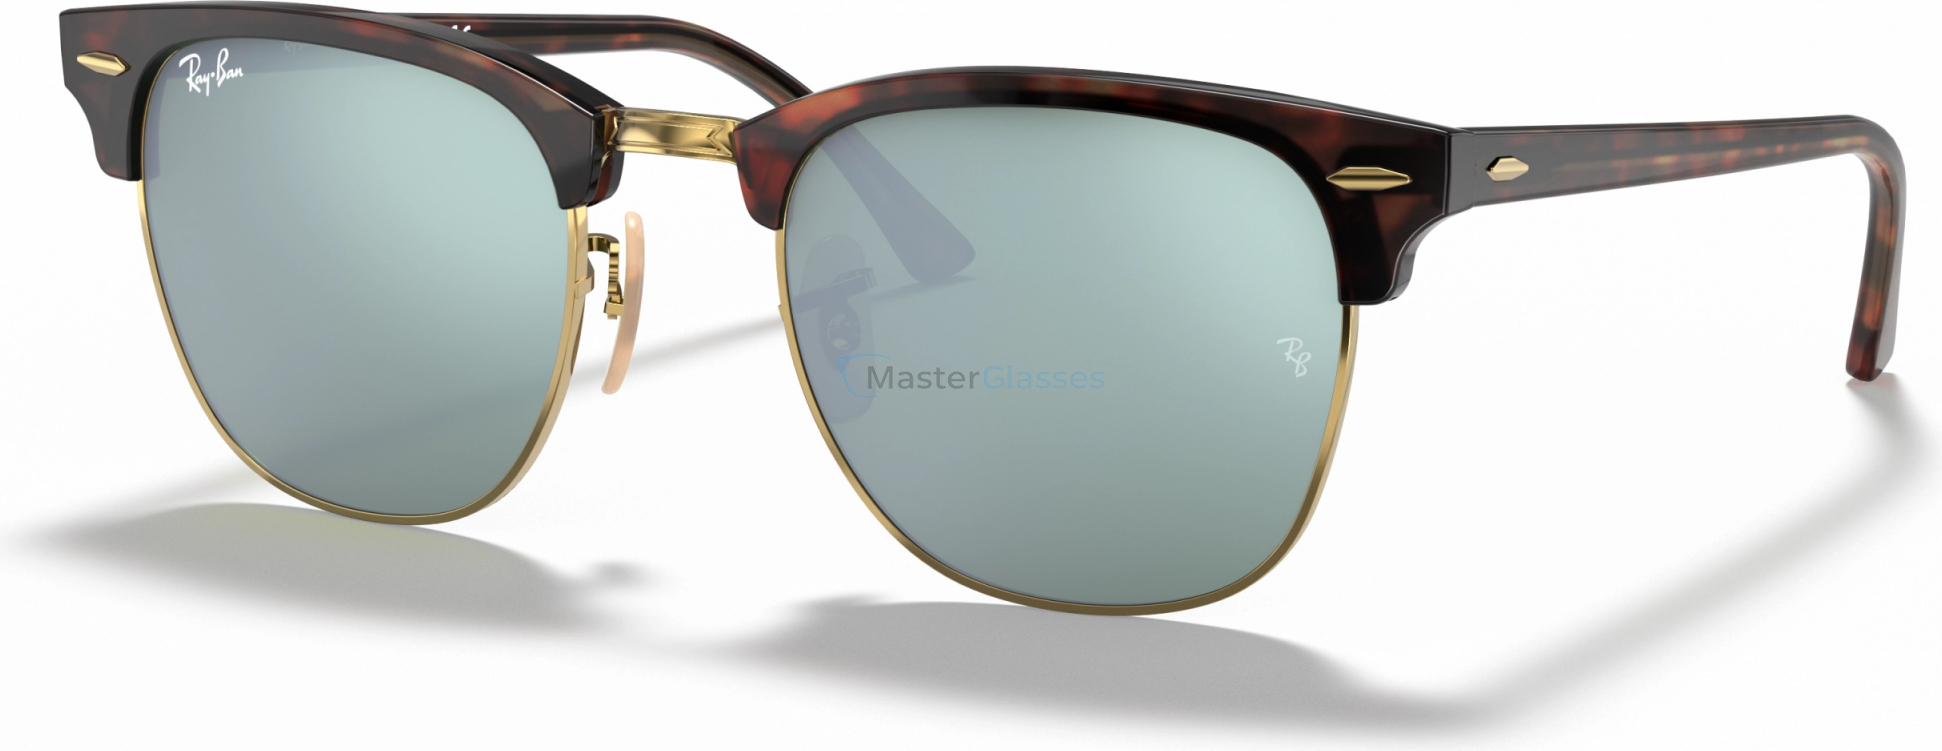   Ray-Ban Clubmaster RB3016 114530 Sand Havana/gold